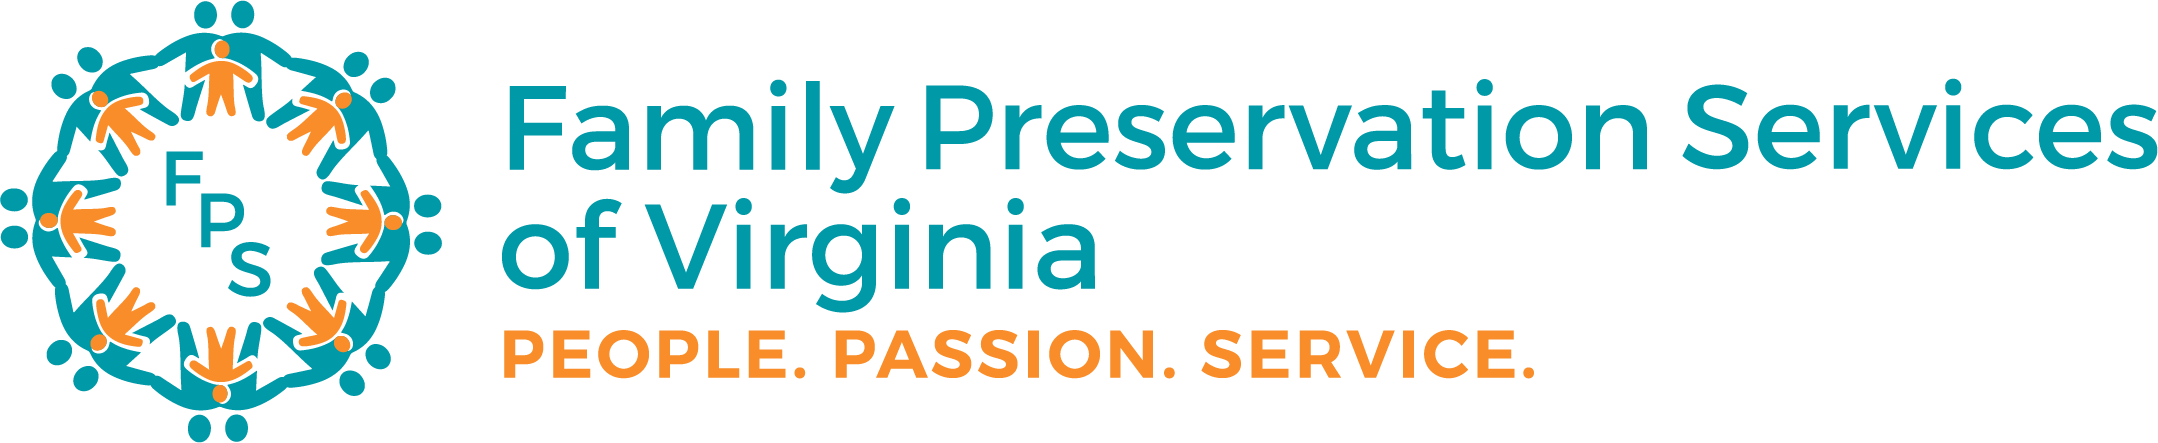 Family Preservation Services, Inc.